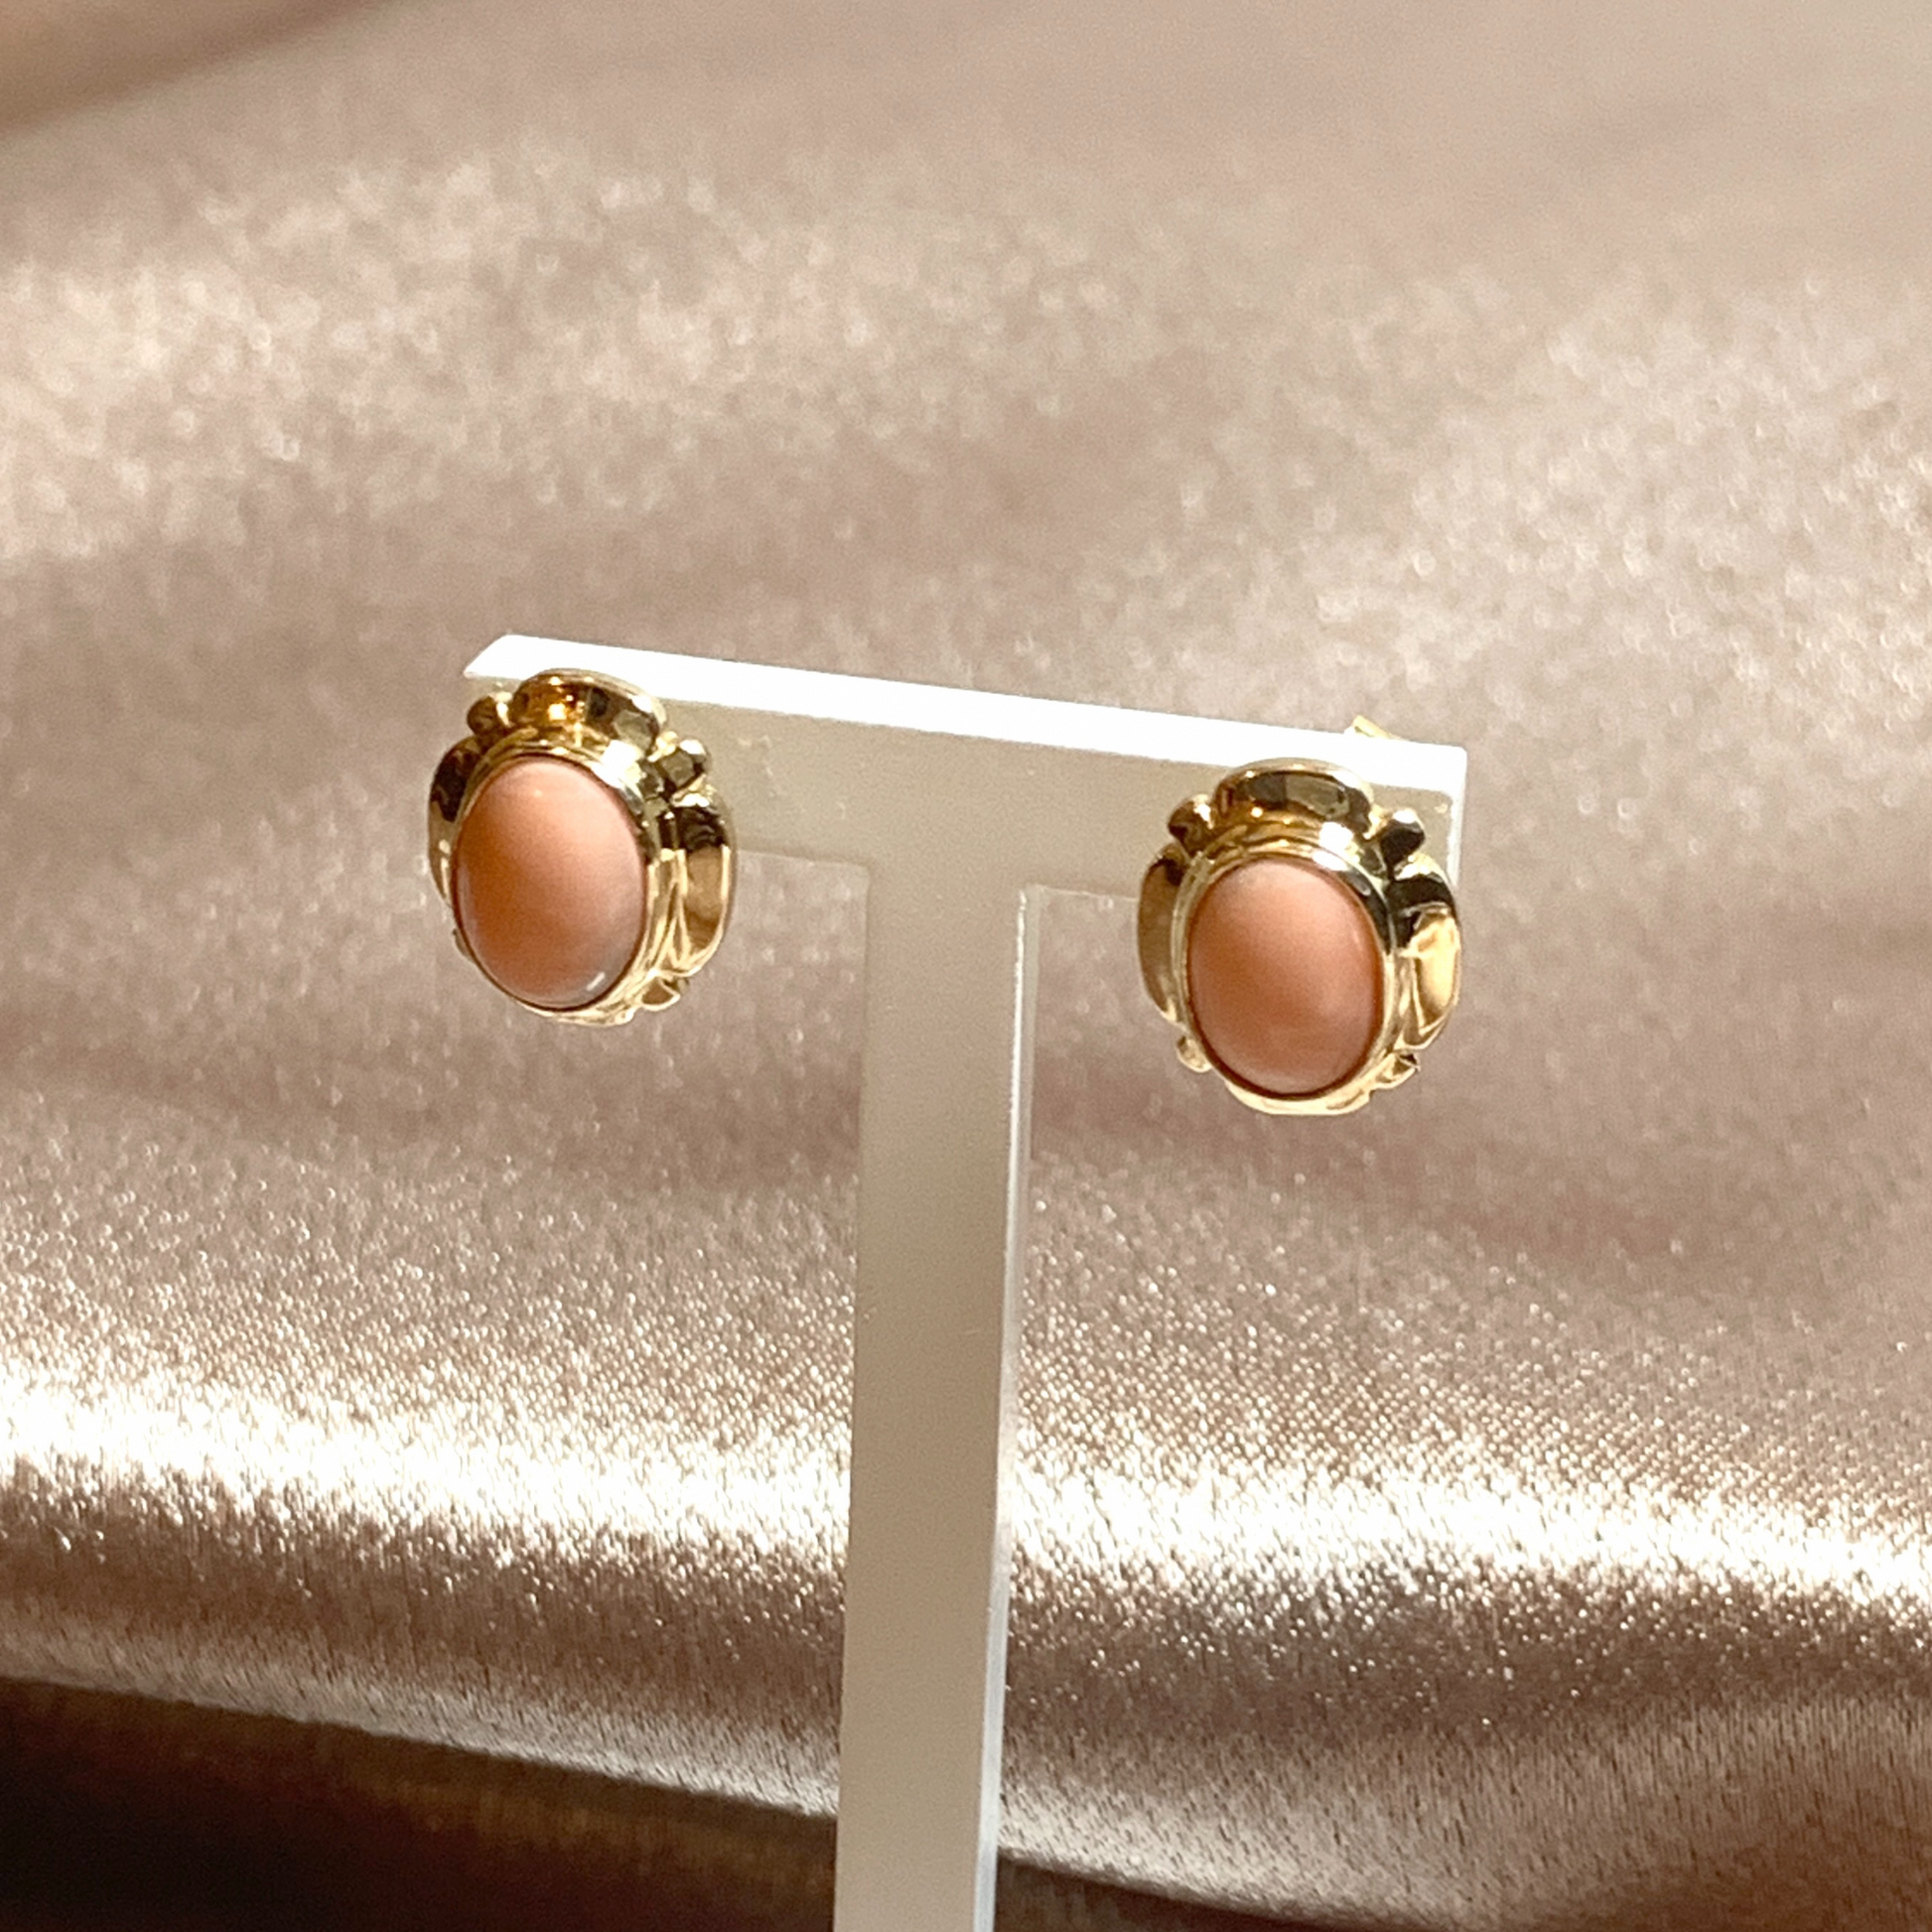 Coral oval yellow gold stud earrings